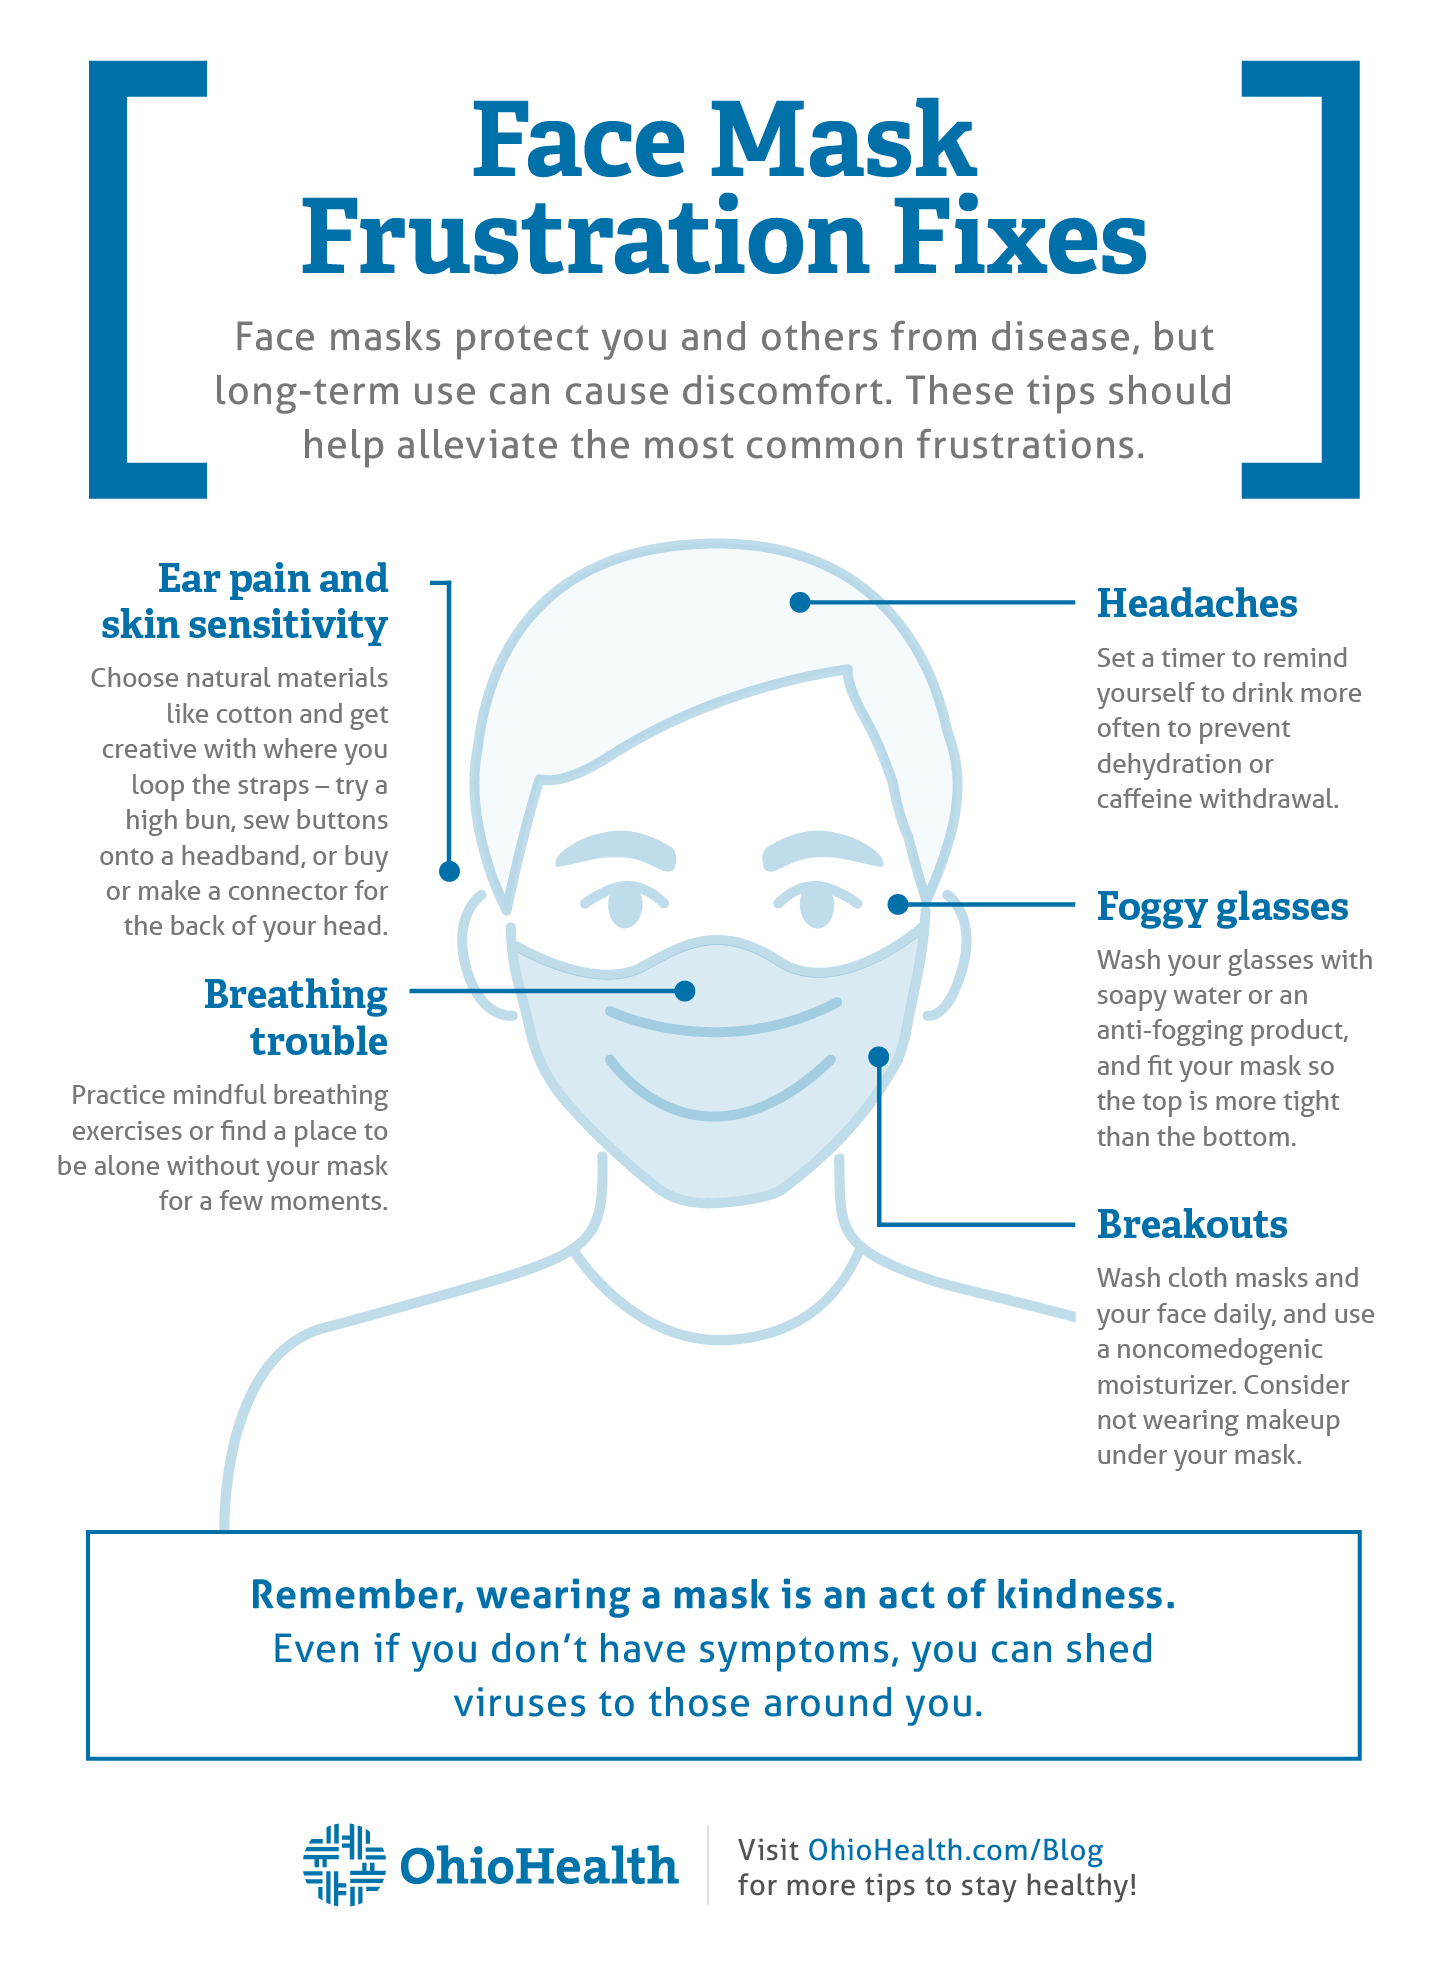 13 insider tips on how to wear a mask without your glasses fogging up,  getting short of breath or your ears hurting